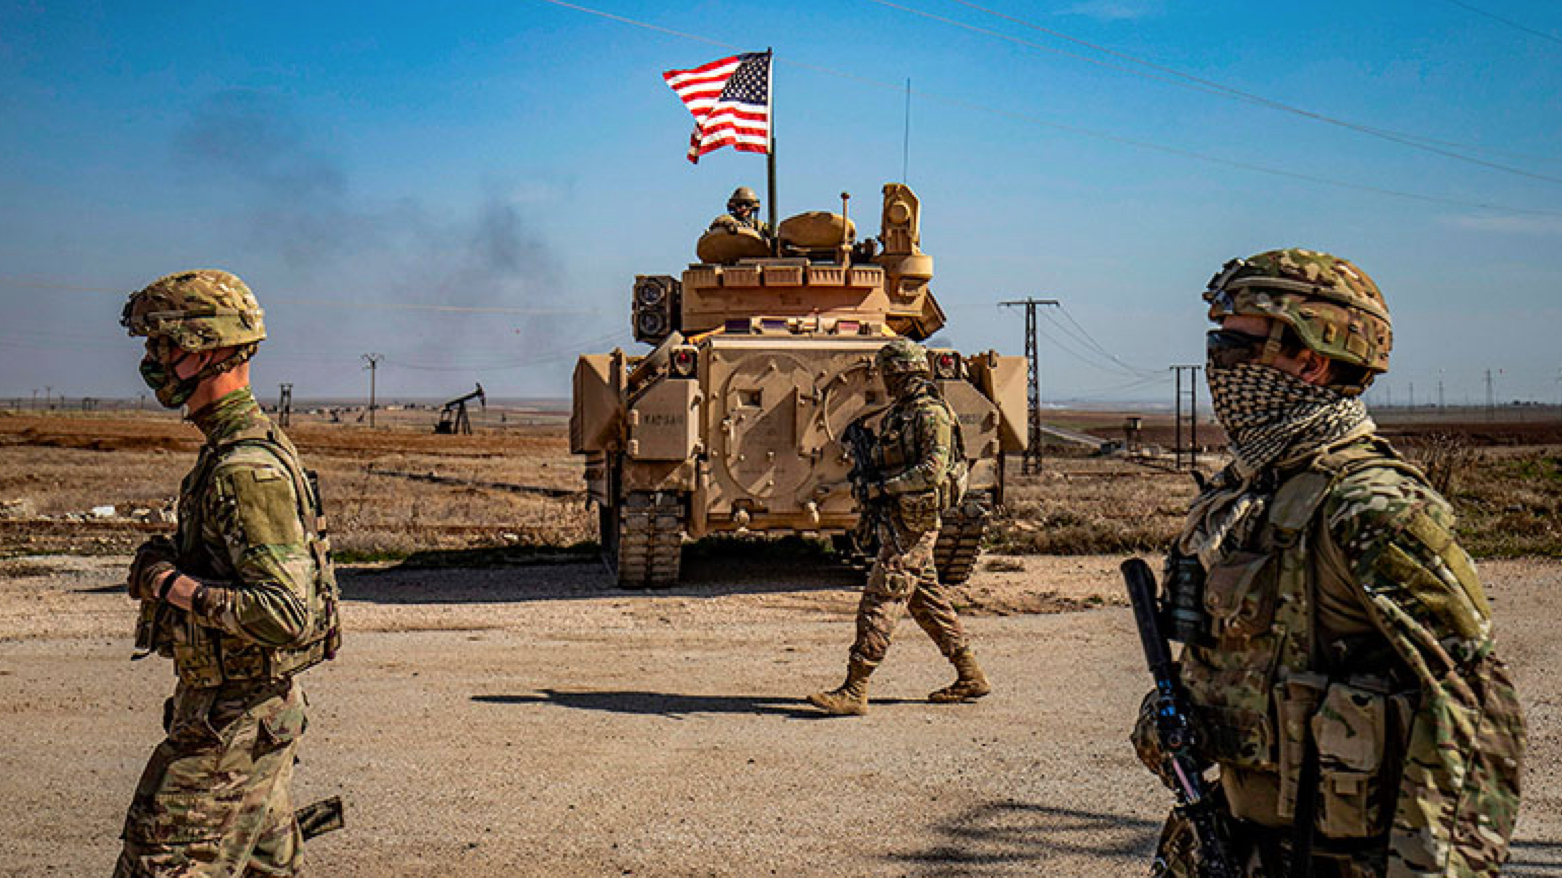 US soldiers in Syria, Feb. 13, 2021 (Photo: Delil Souleiman/ AFP)